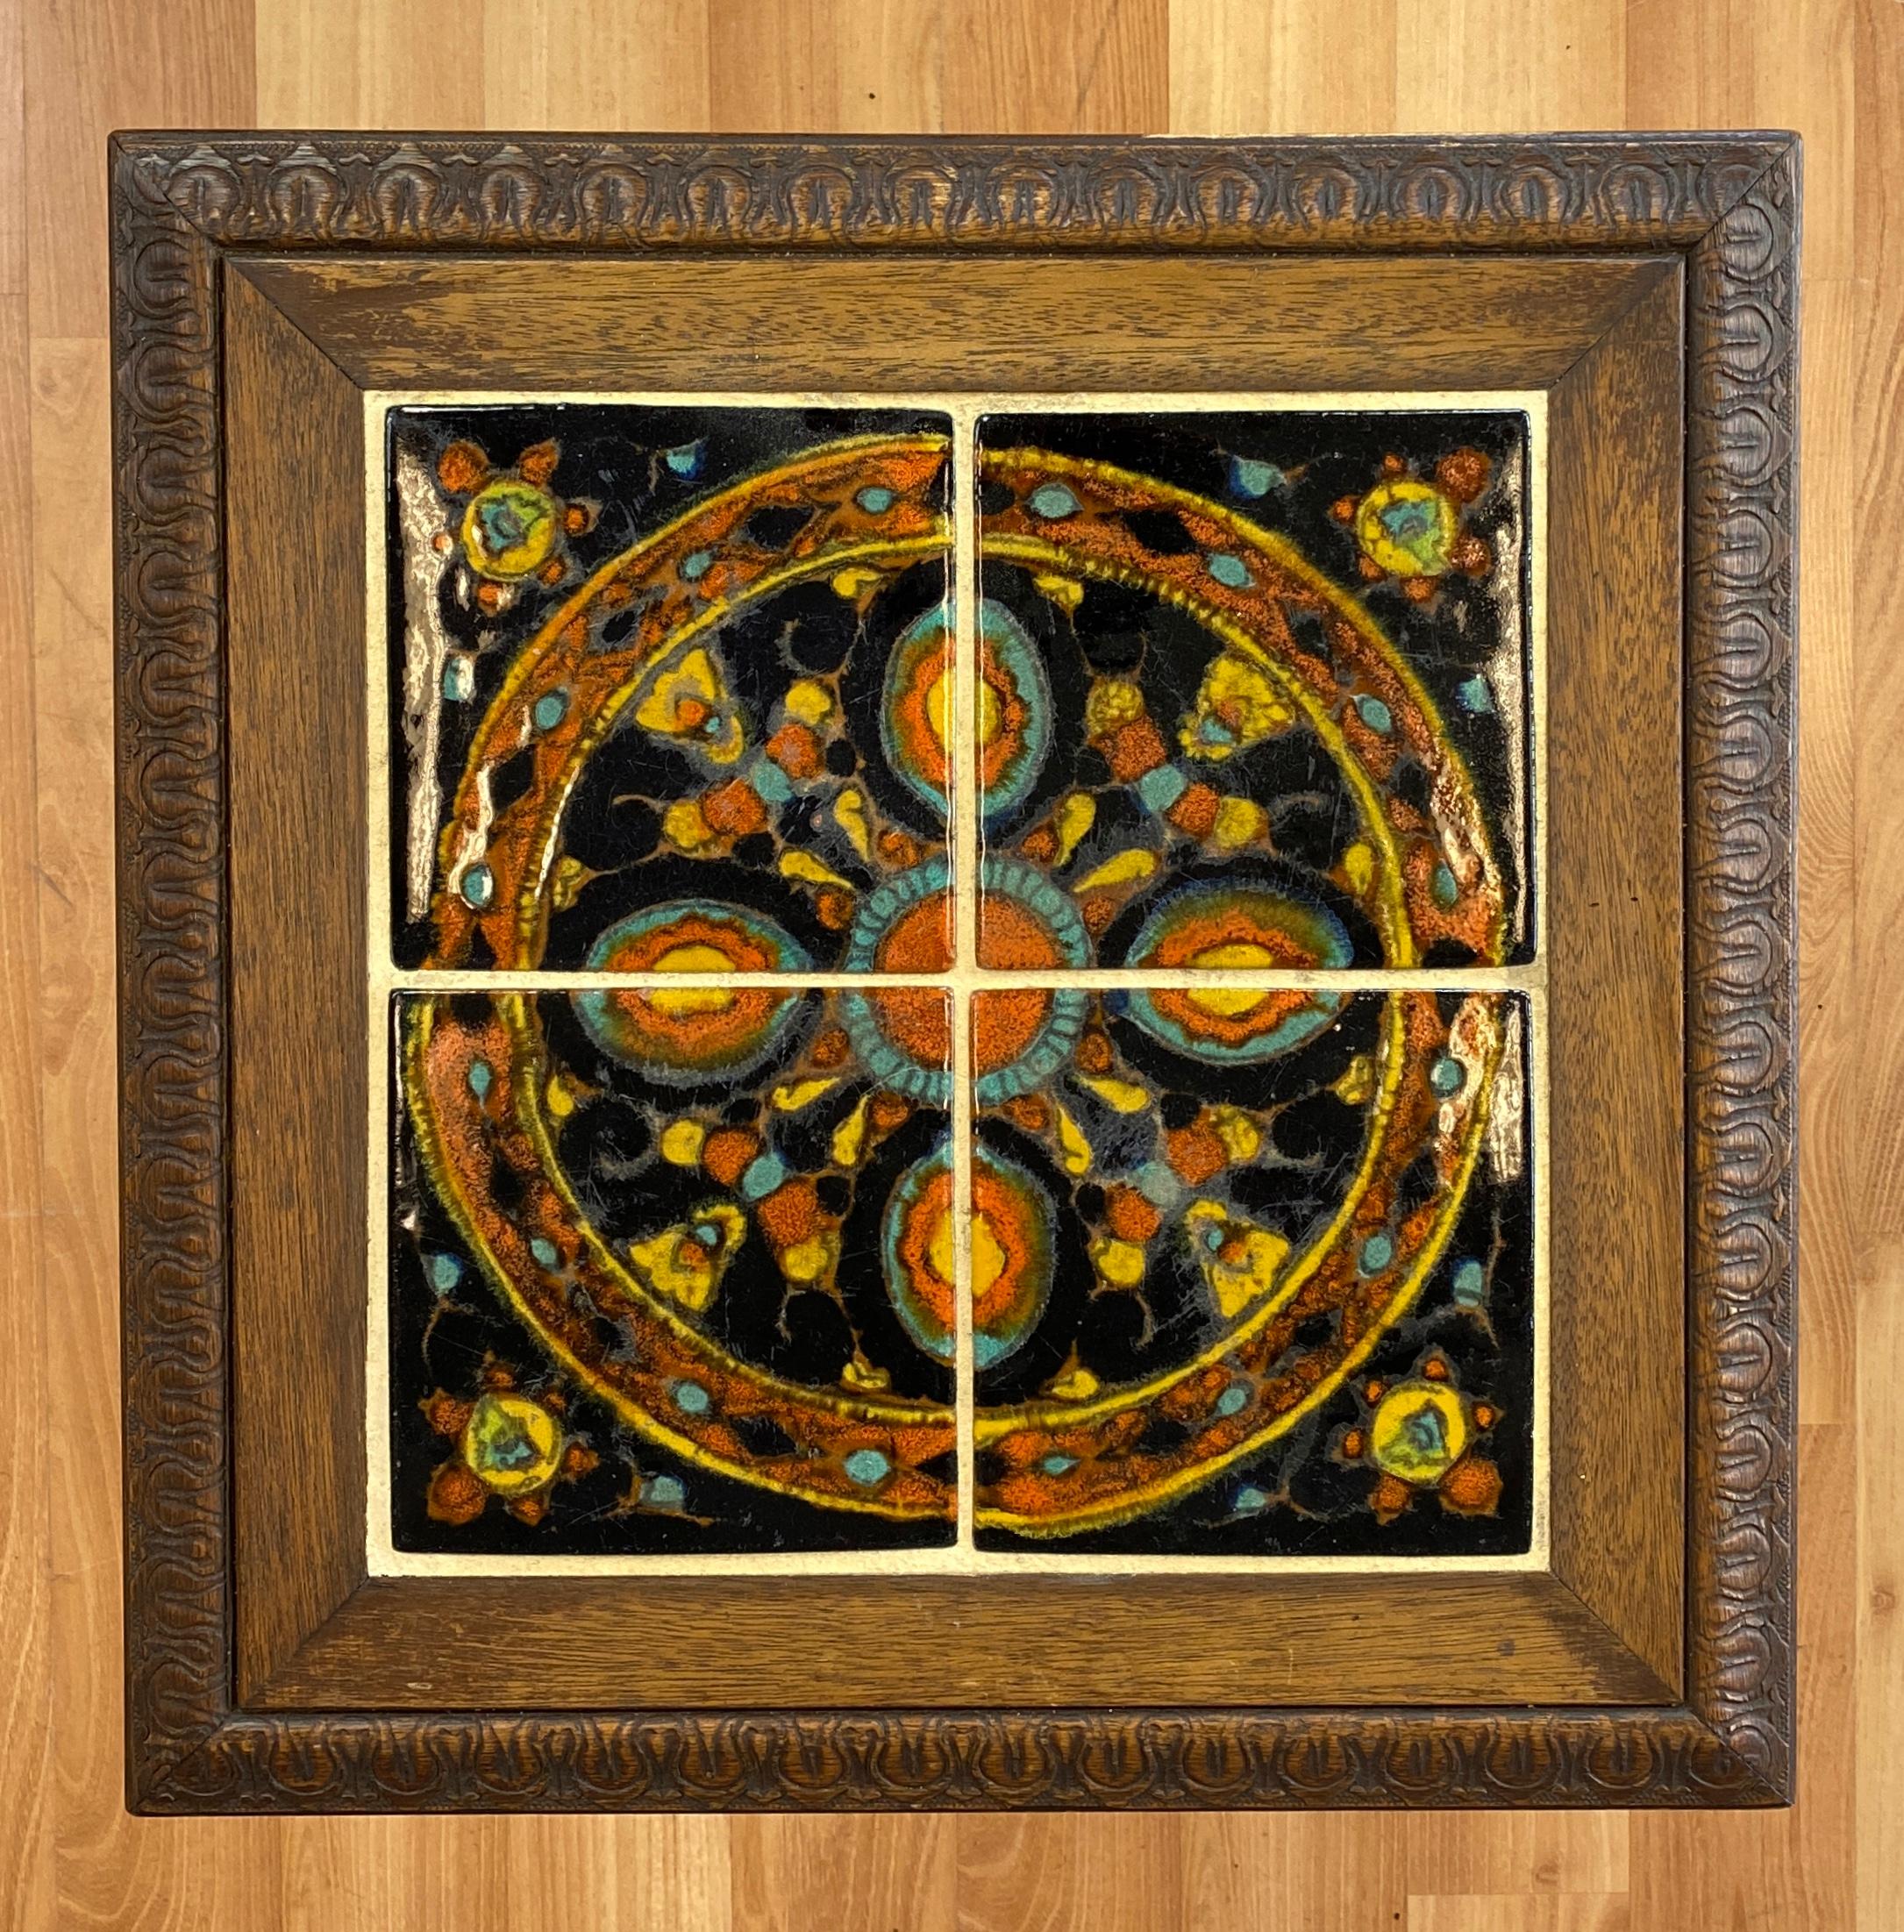 Offered here is a circa 1930s Mission style tile top table by Taylor Tilery
Believe it's California oak, stretchers between the legs that are holding of a four tile top, nice colors
Black, burnt orange, teal, yellow and a little brown in there. A